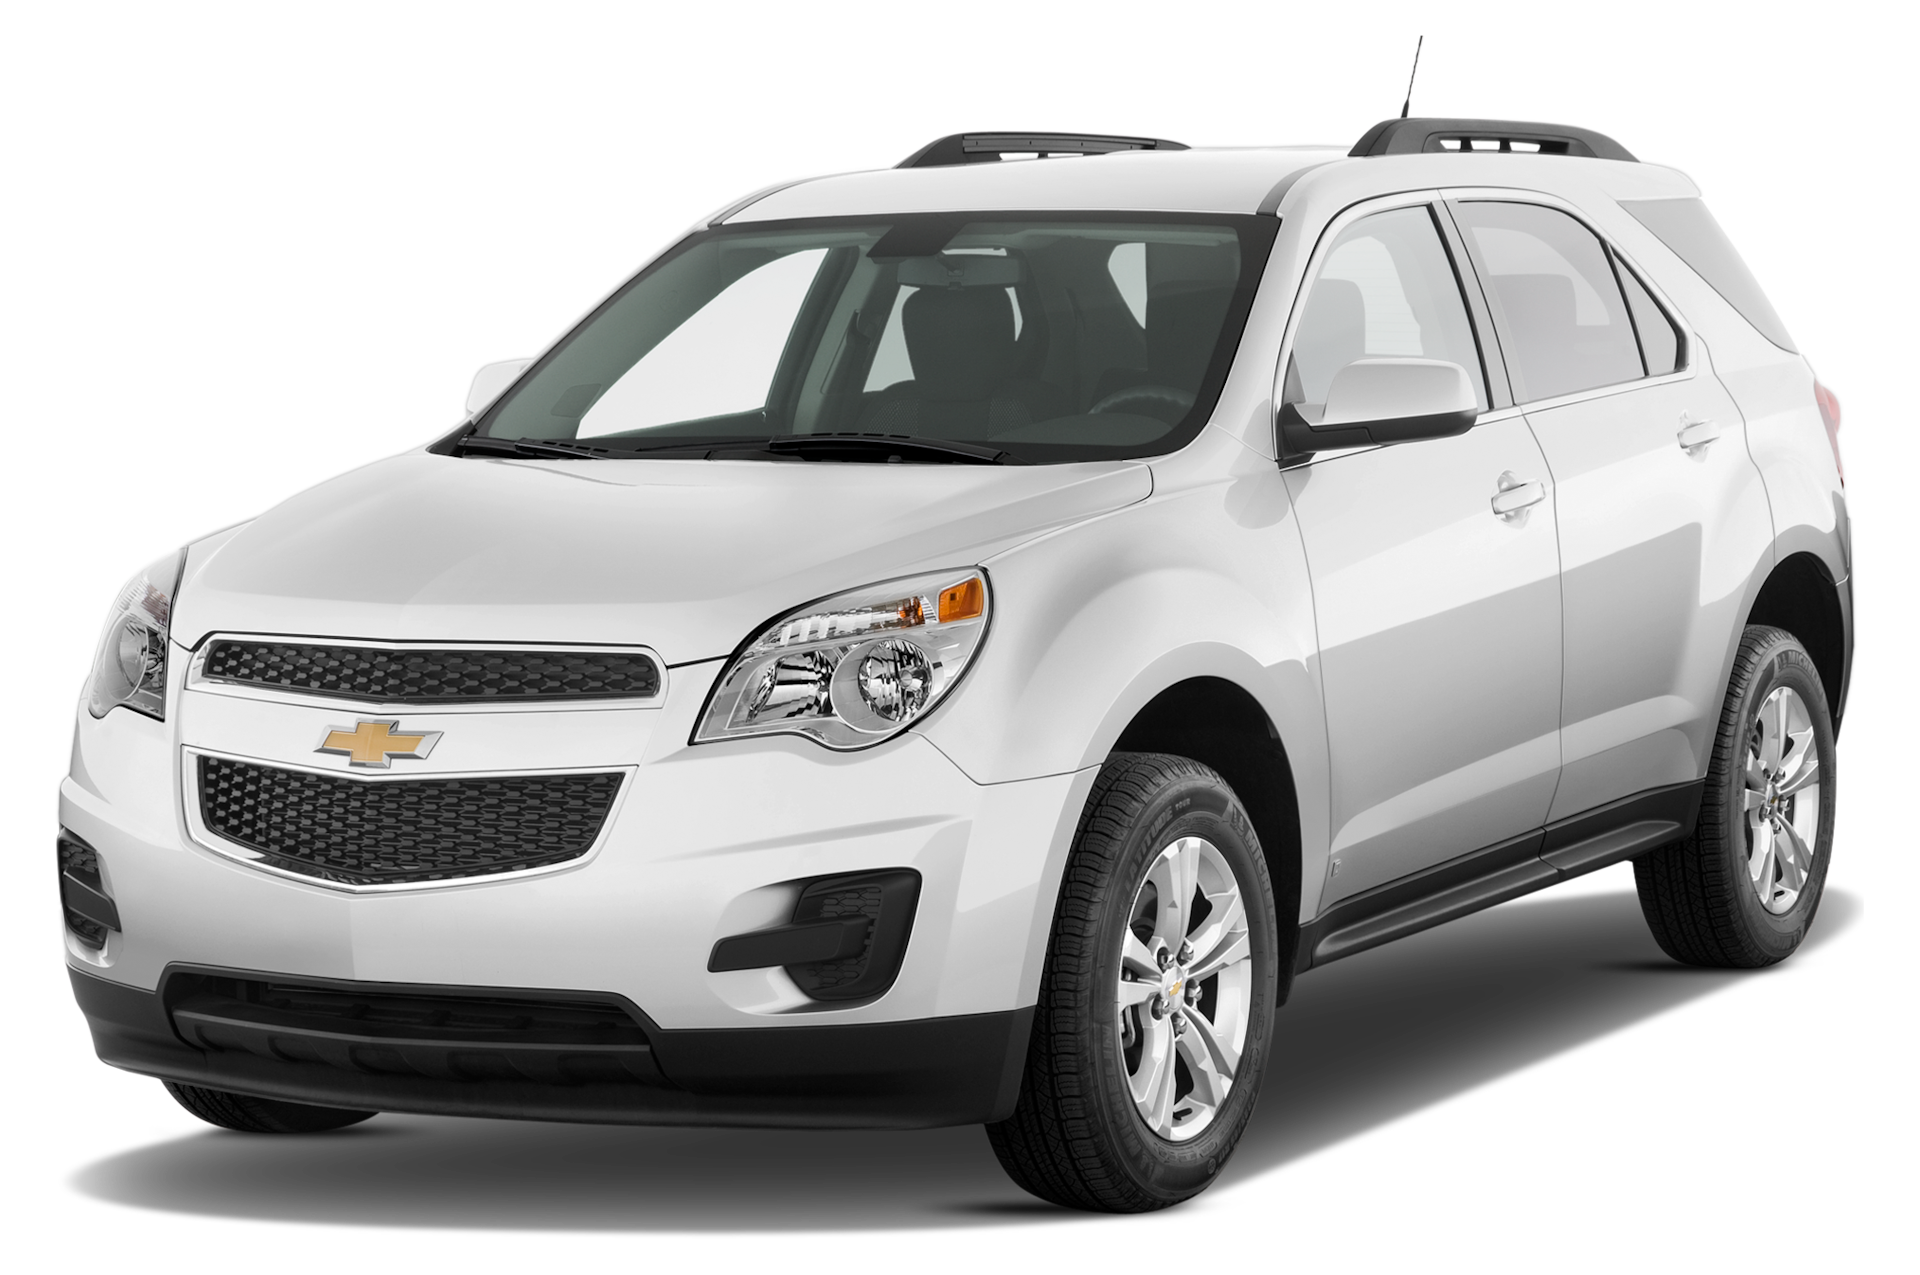 2014 Chevrolet Equinox Prices, Reviews, and Photos - MotorTrend